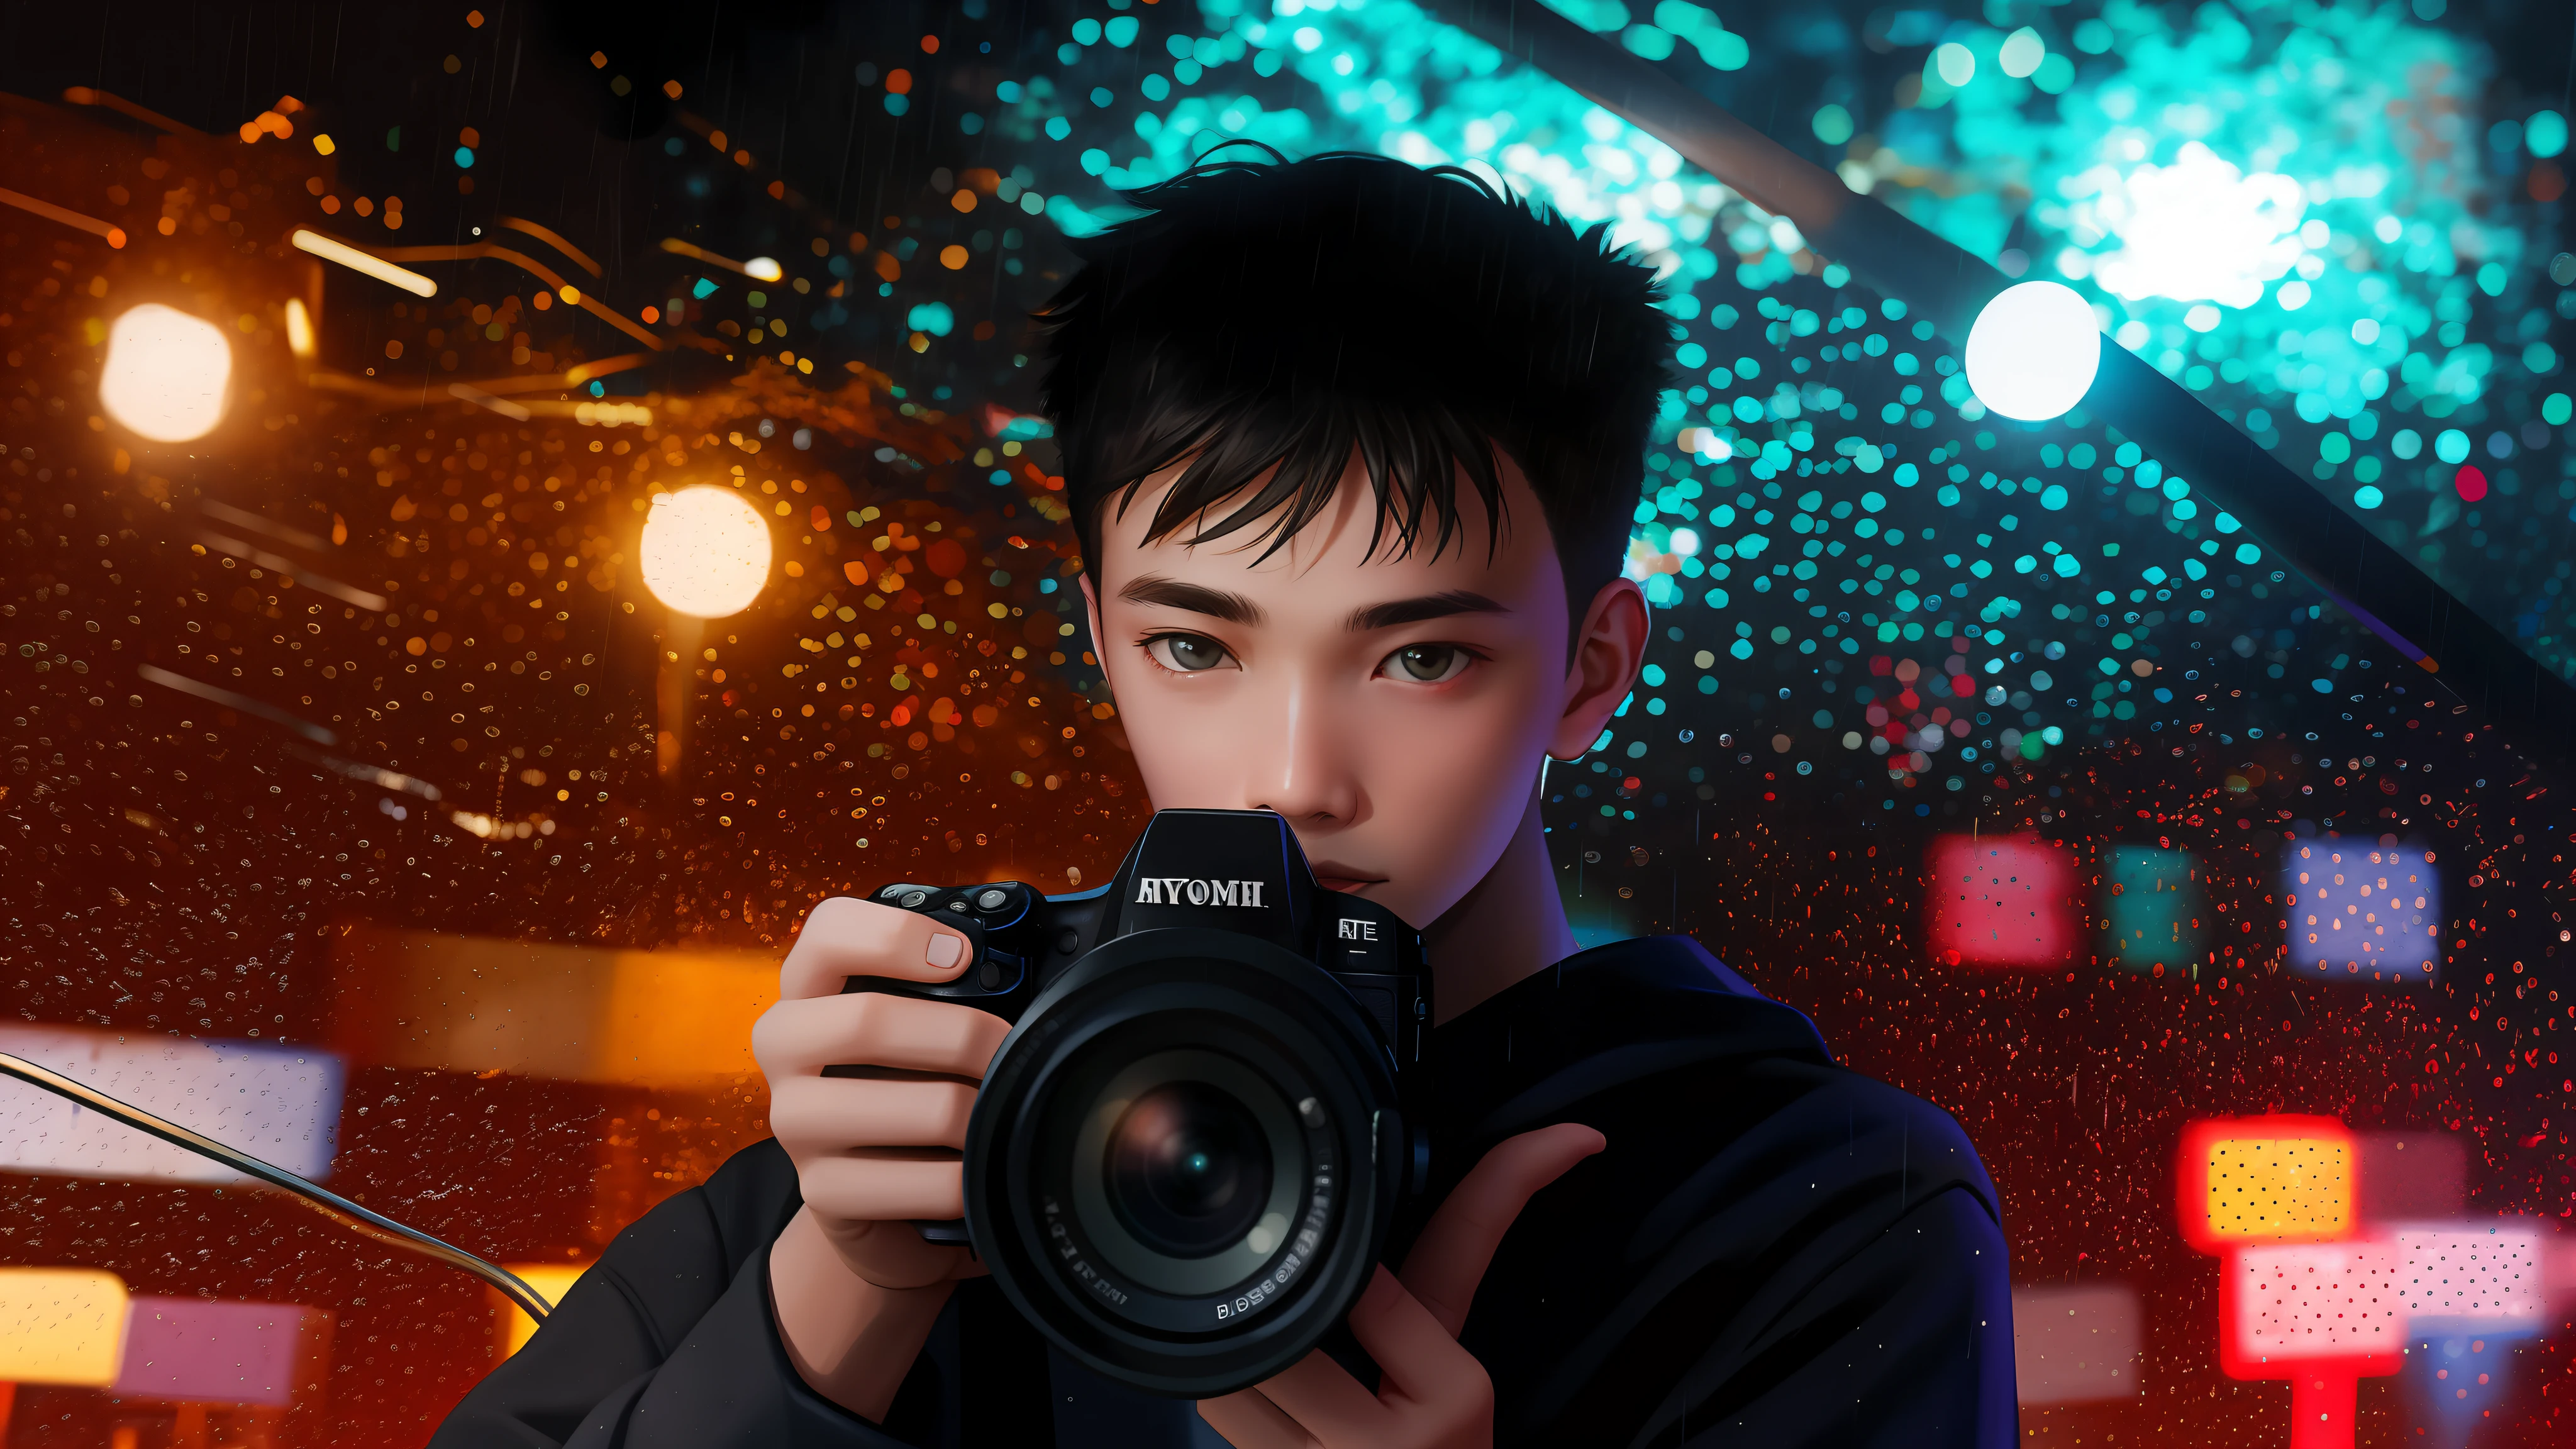 Boy holding camera taking pictures in the rain, portrait of people